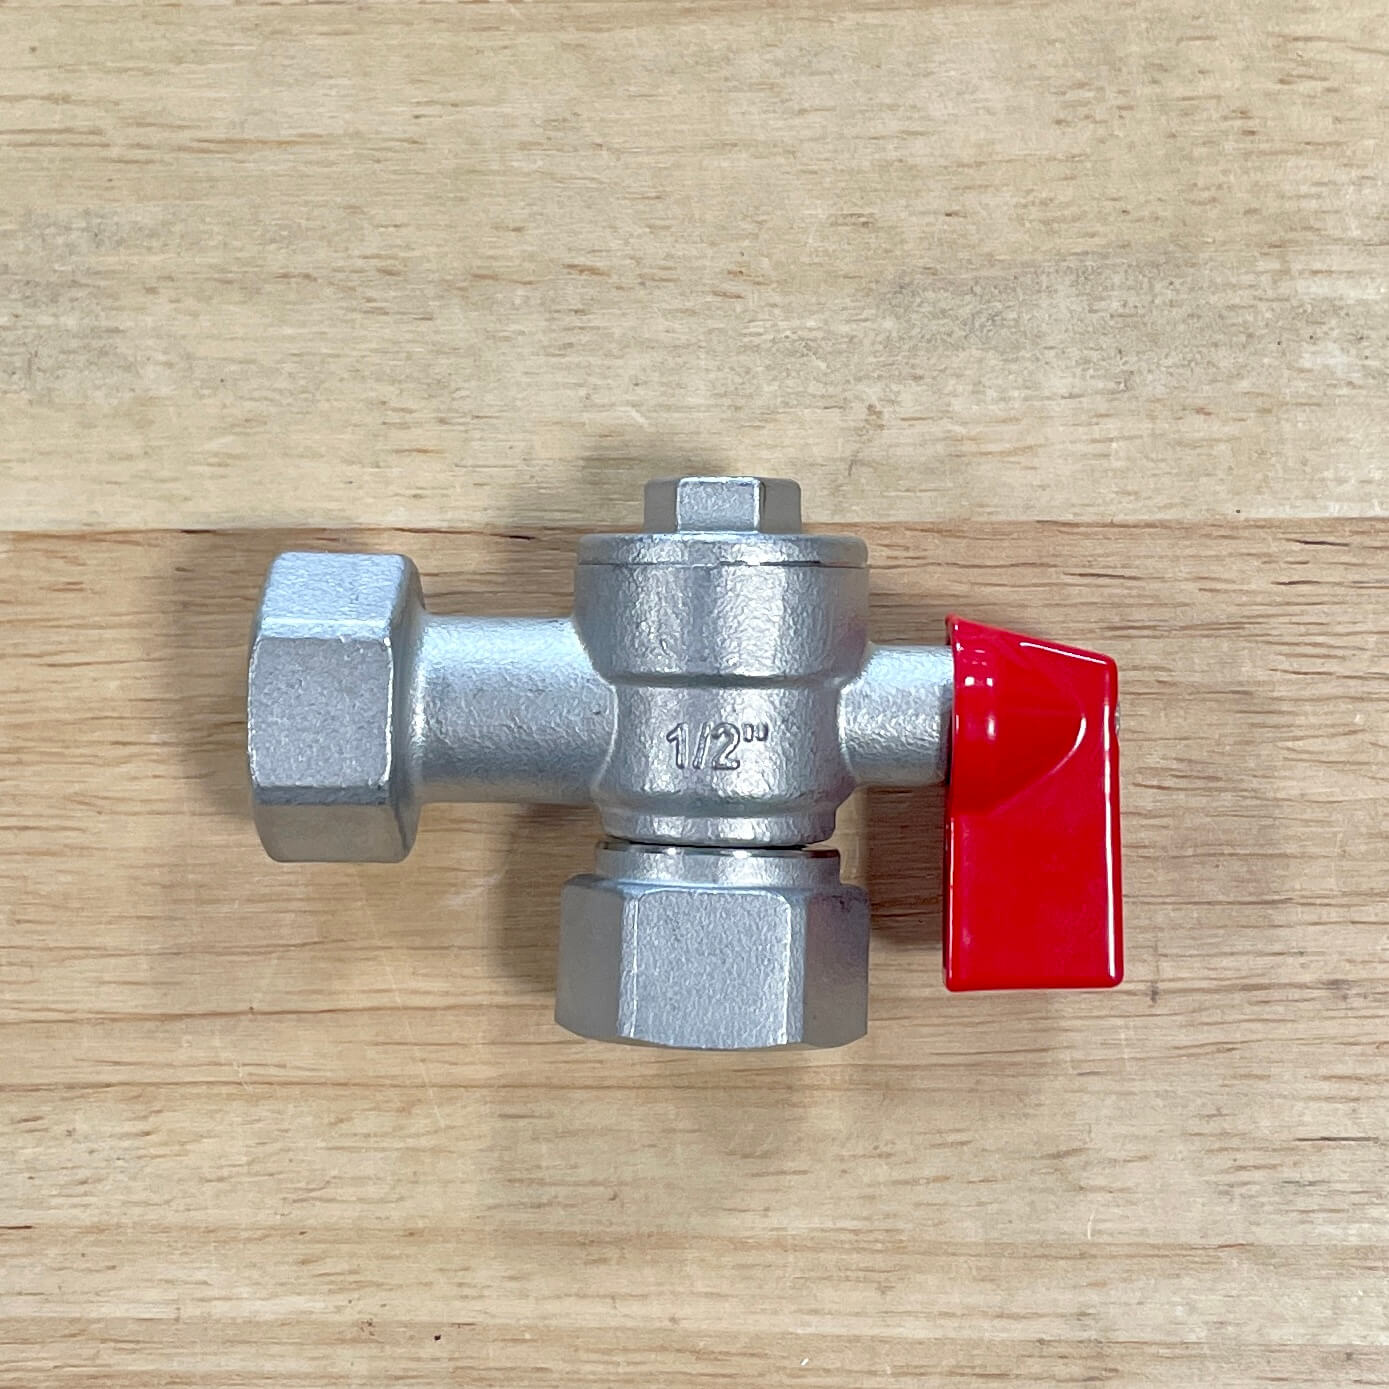 Grainfather G40 1/2 Inch Right Angle Ball Valve - All Things Fermented | Home Brew Shop NZ | Supplies | Equipment